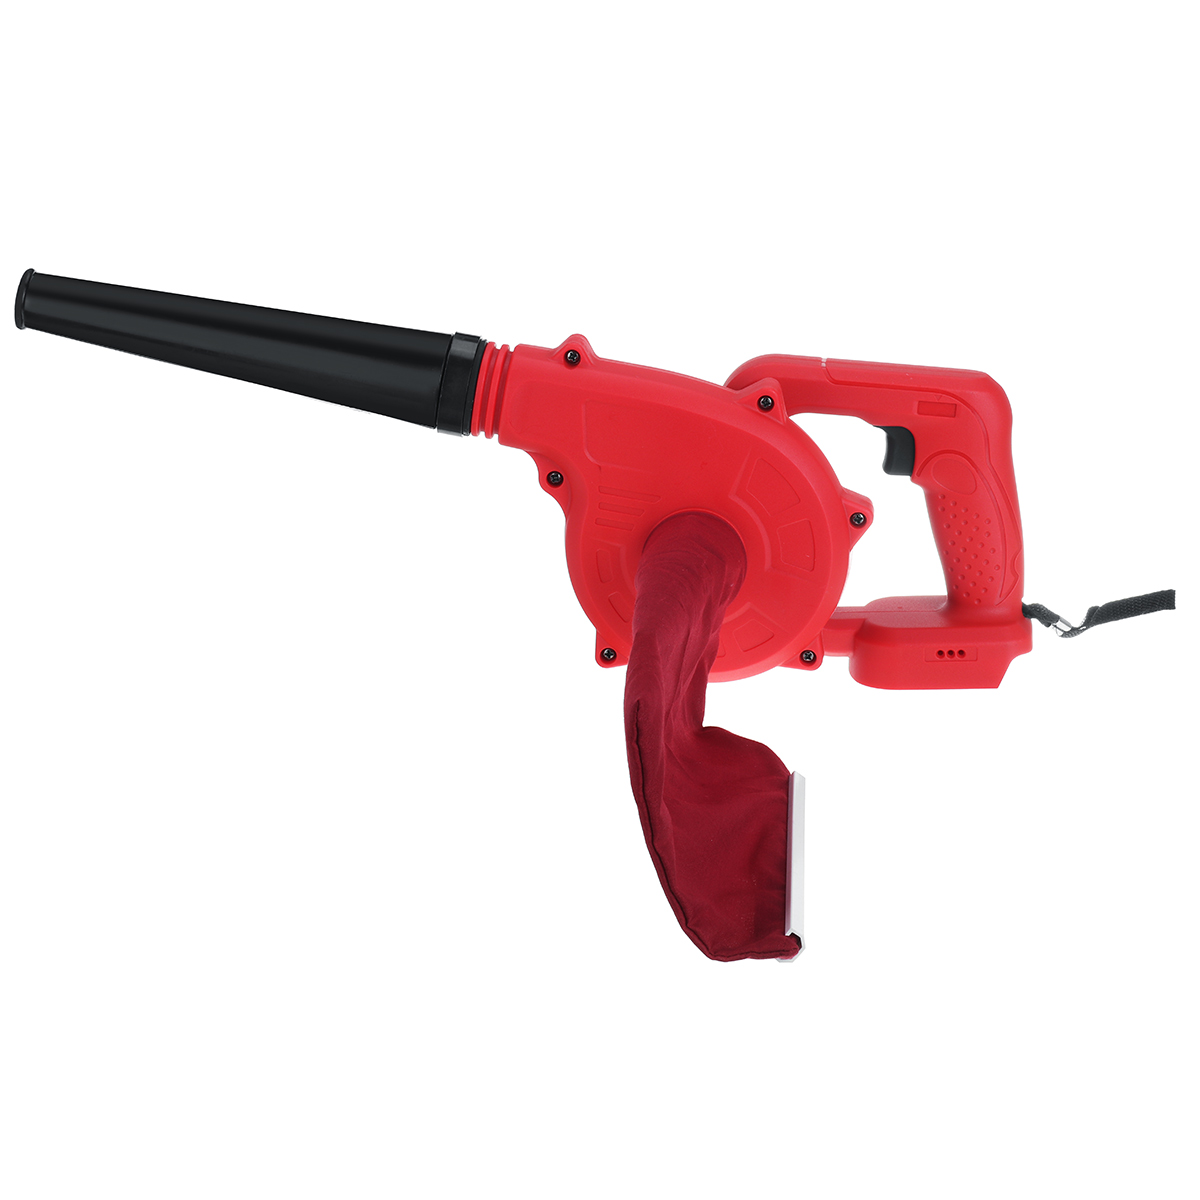 18V-Cordless-Rechargable-Electric-Air-Blower-Vacuum-Cleaner-Suction-Blower-Tool-For-Makita-18V-Li-io-1632470-7